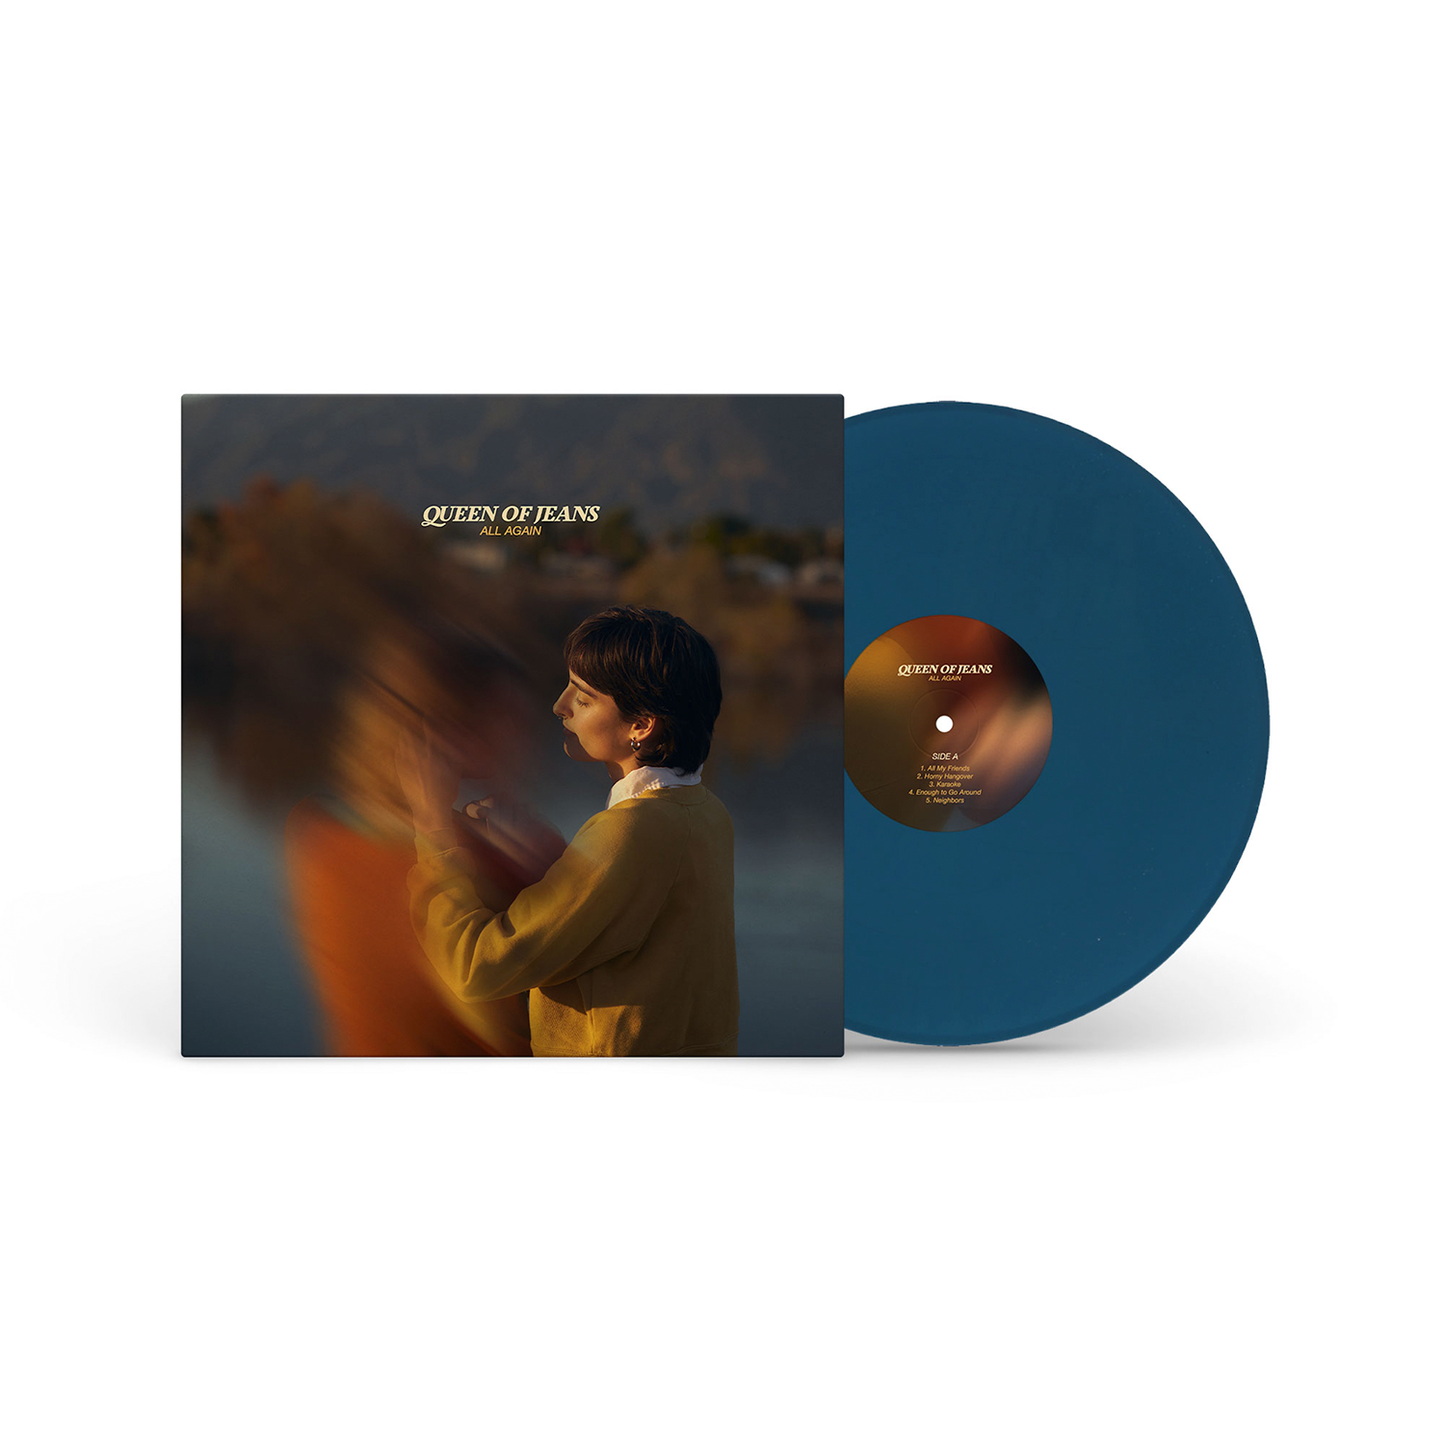 Queen of Jeans - All Again (Pre-Order)